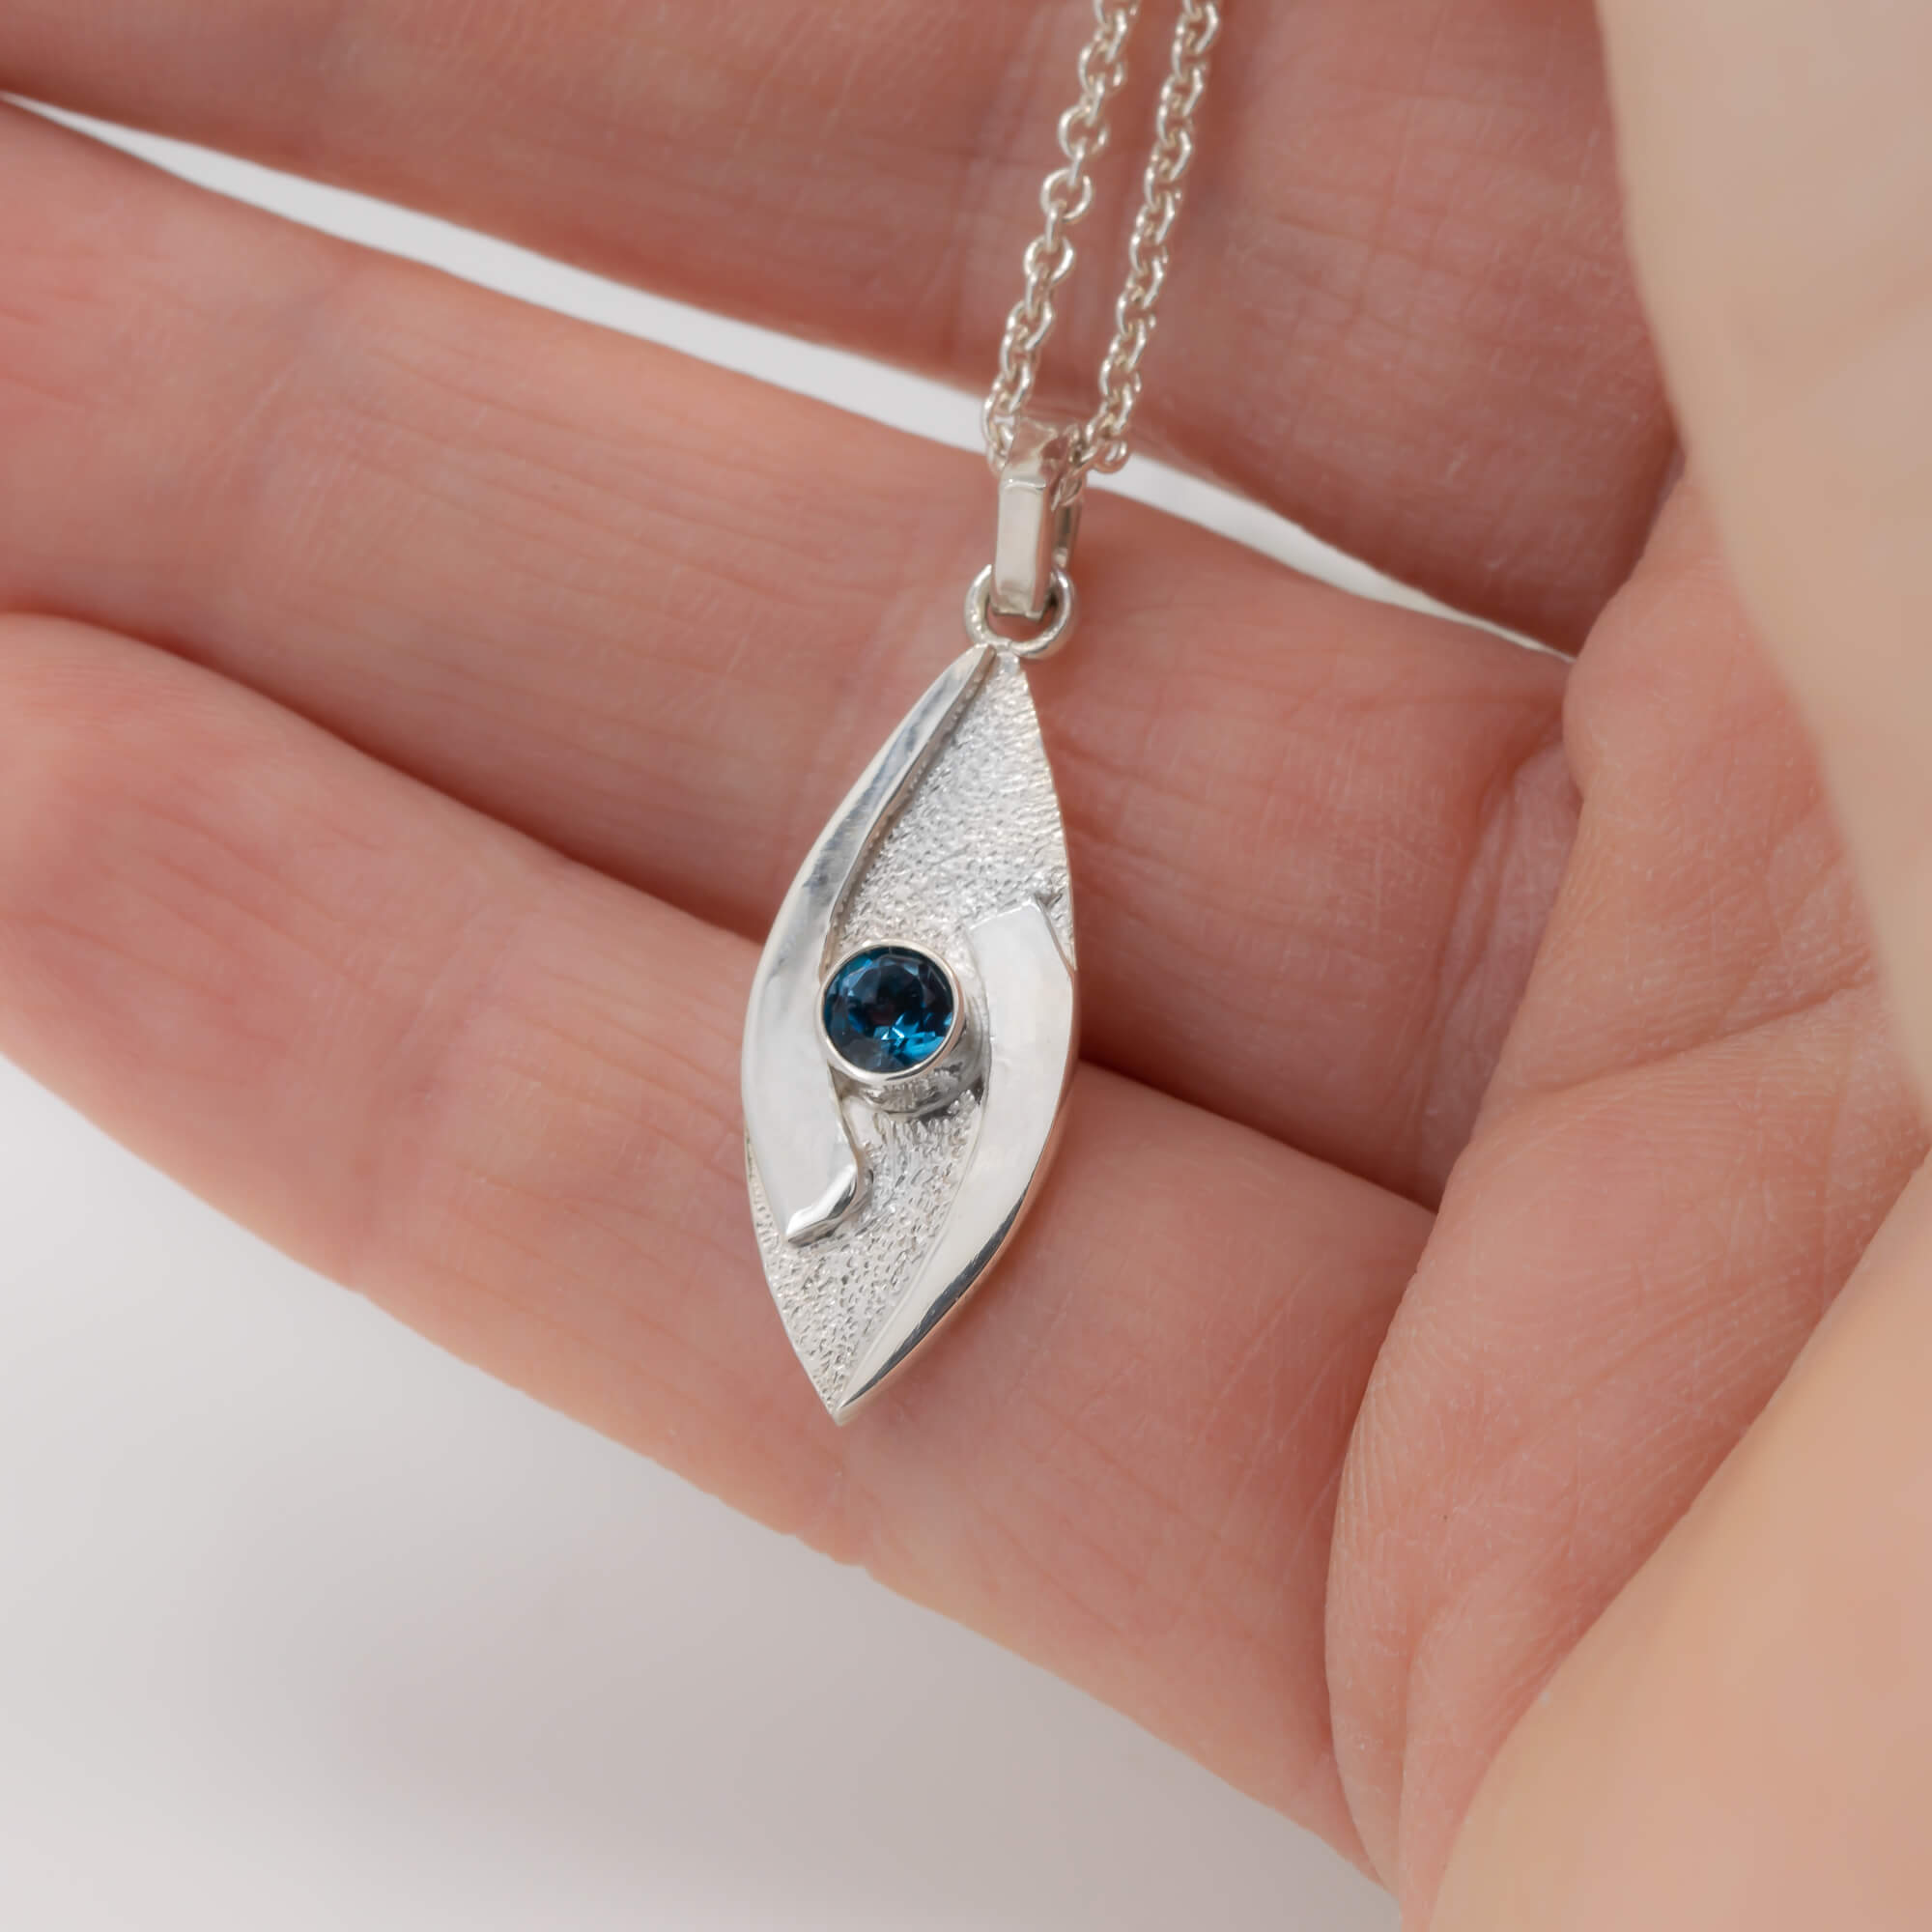 small hugged pendant necklace in sterling silver with a stardust texture and a 4mm London Blue Topaz faceted stone shown in hand for scale